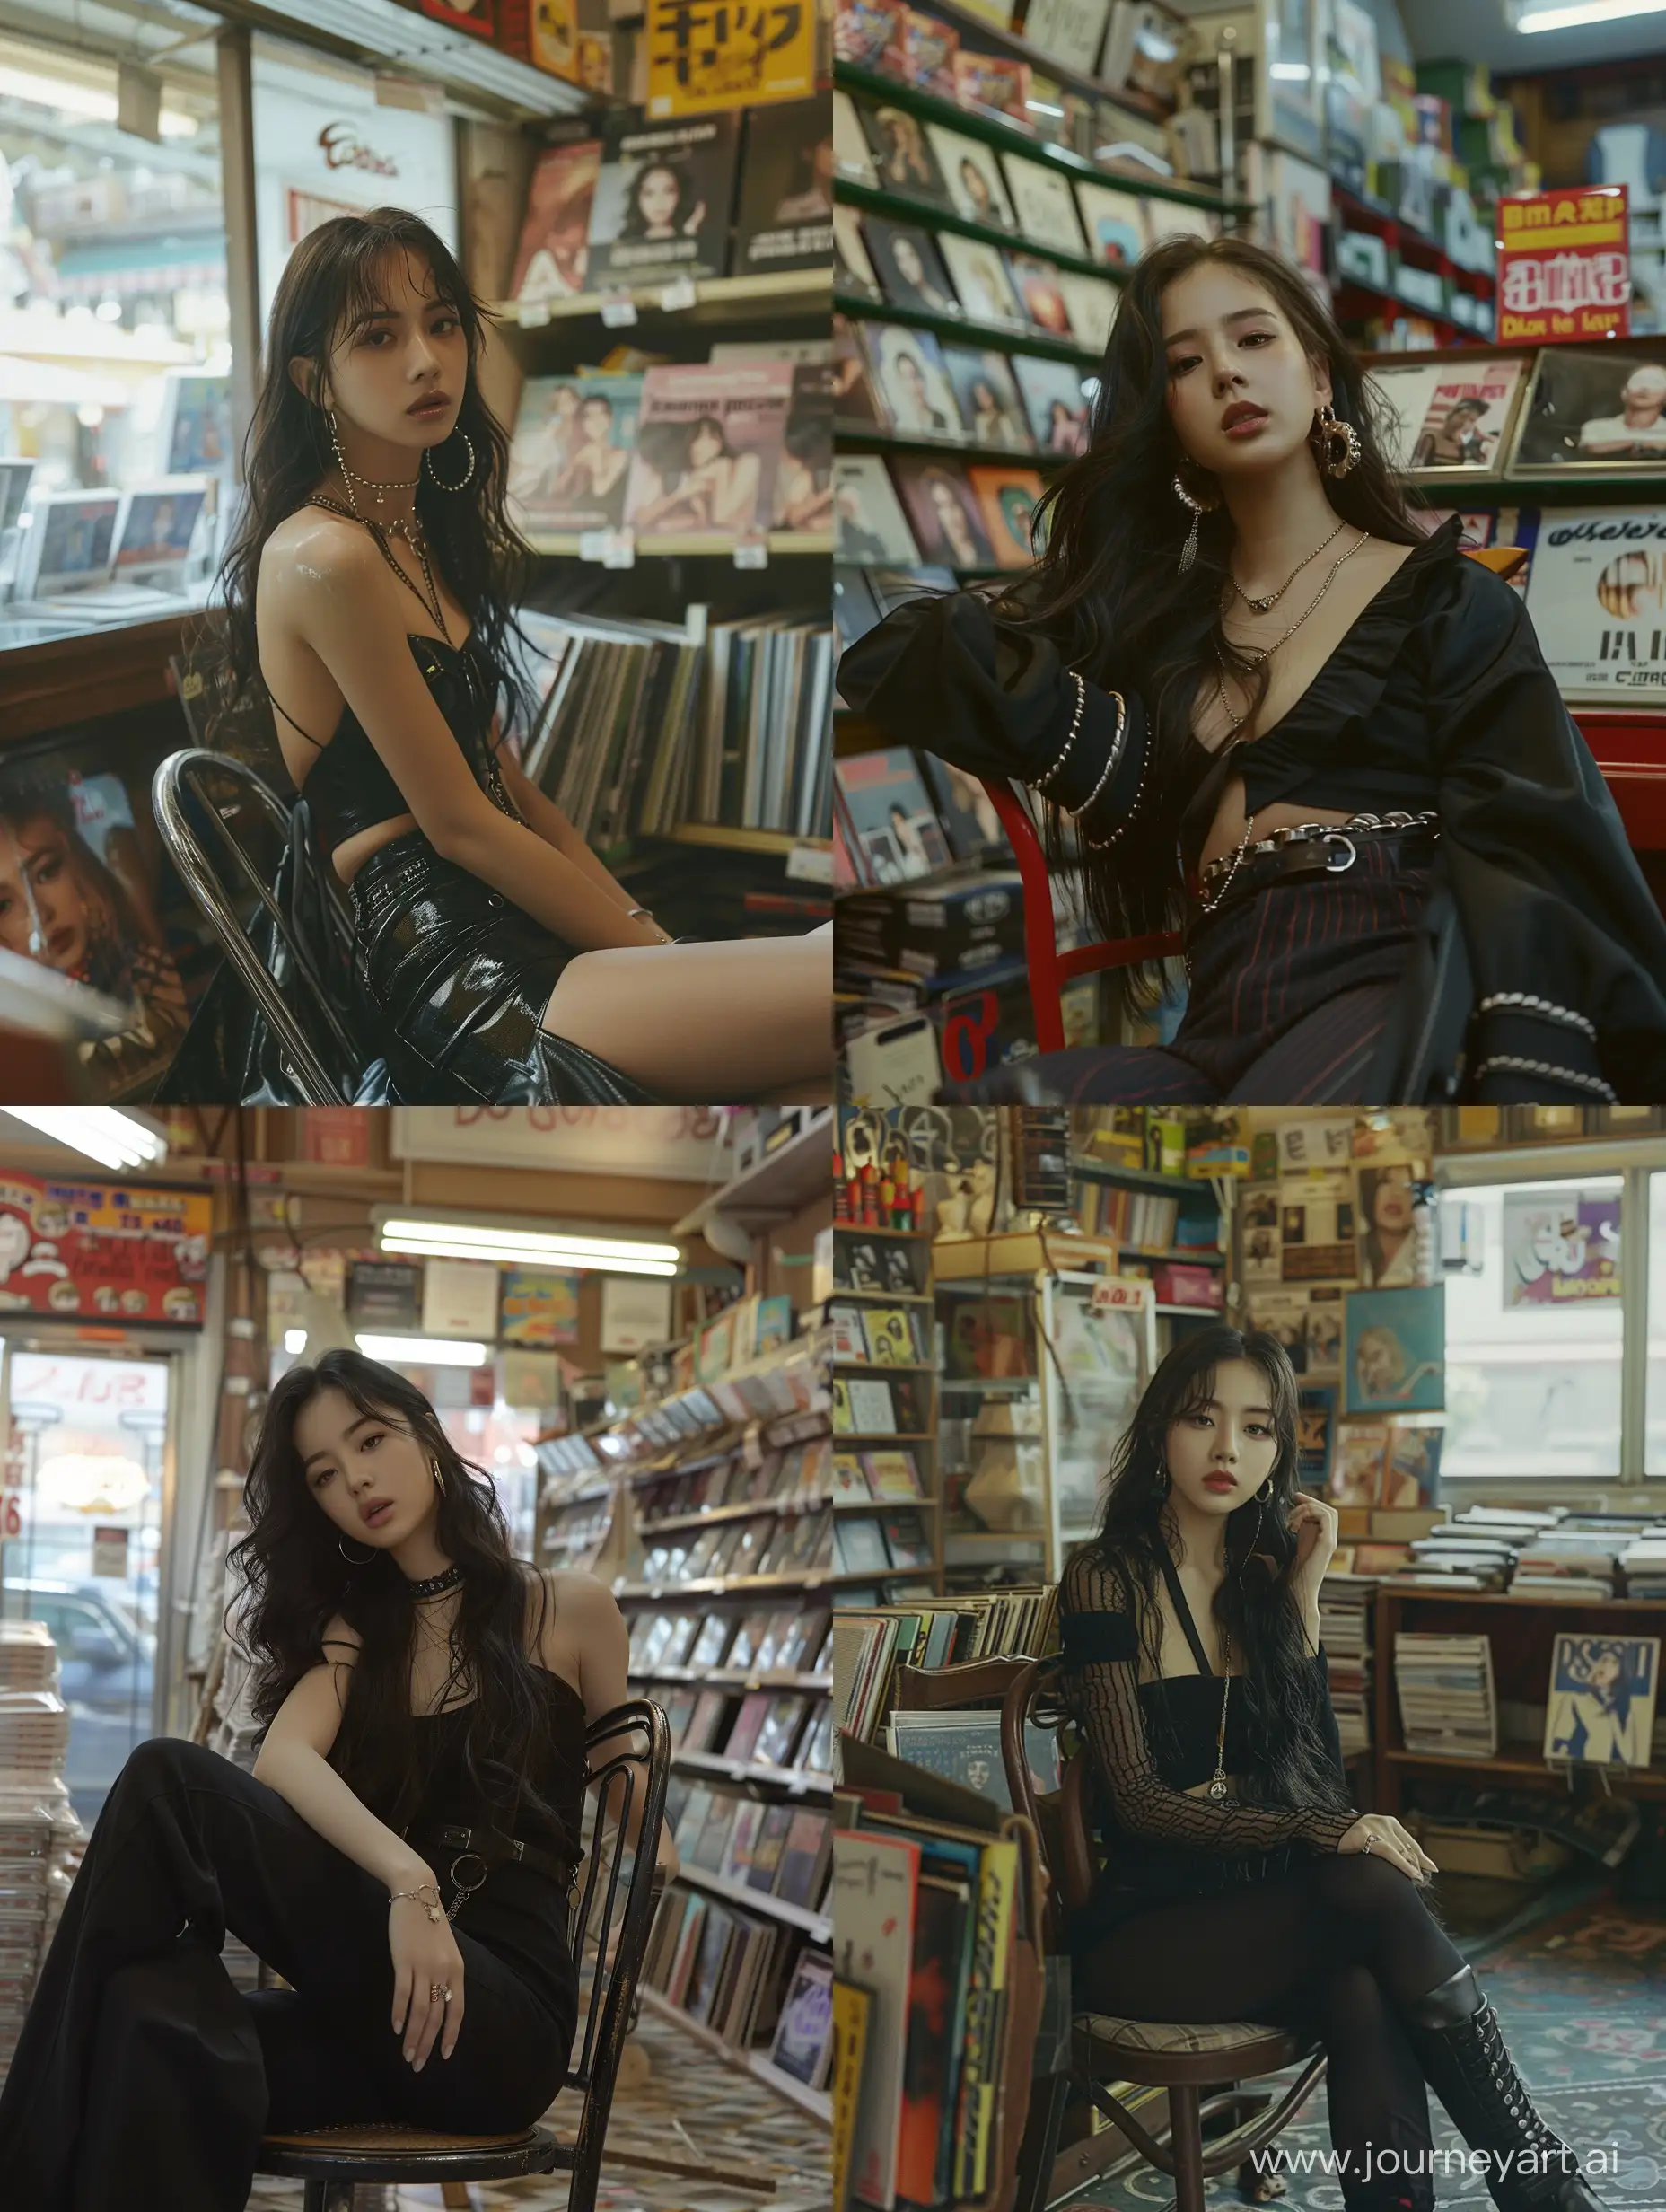 Blackpinks-Jennie-Sitting-in-Album-Store-Amidst-Low-Light-with-Fujifilm-Appeal